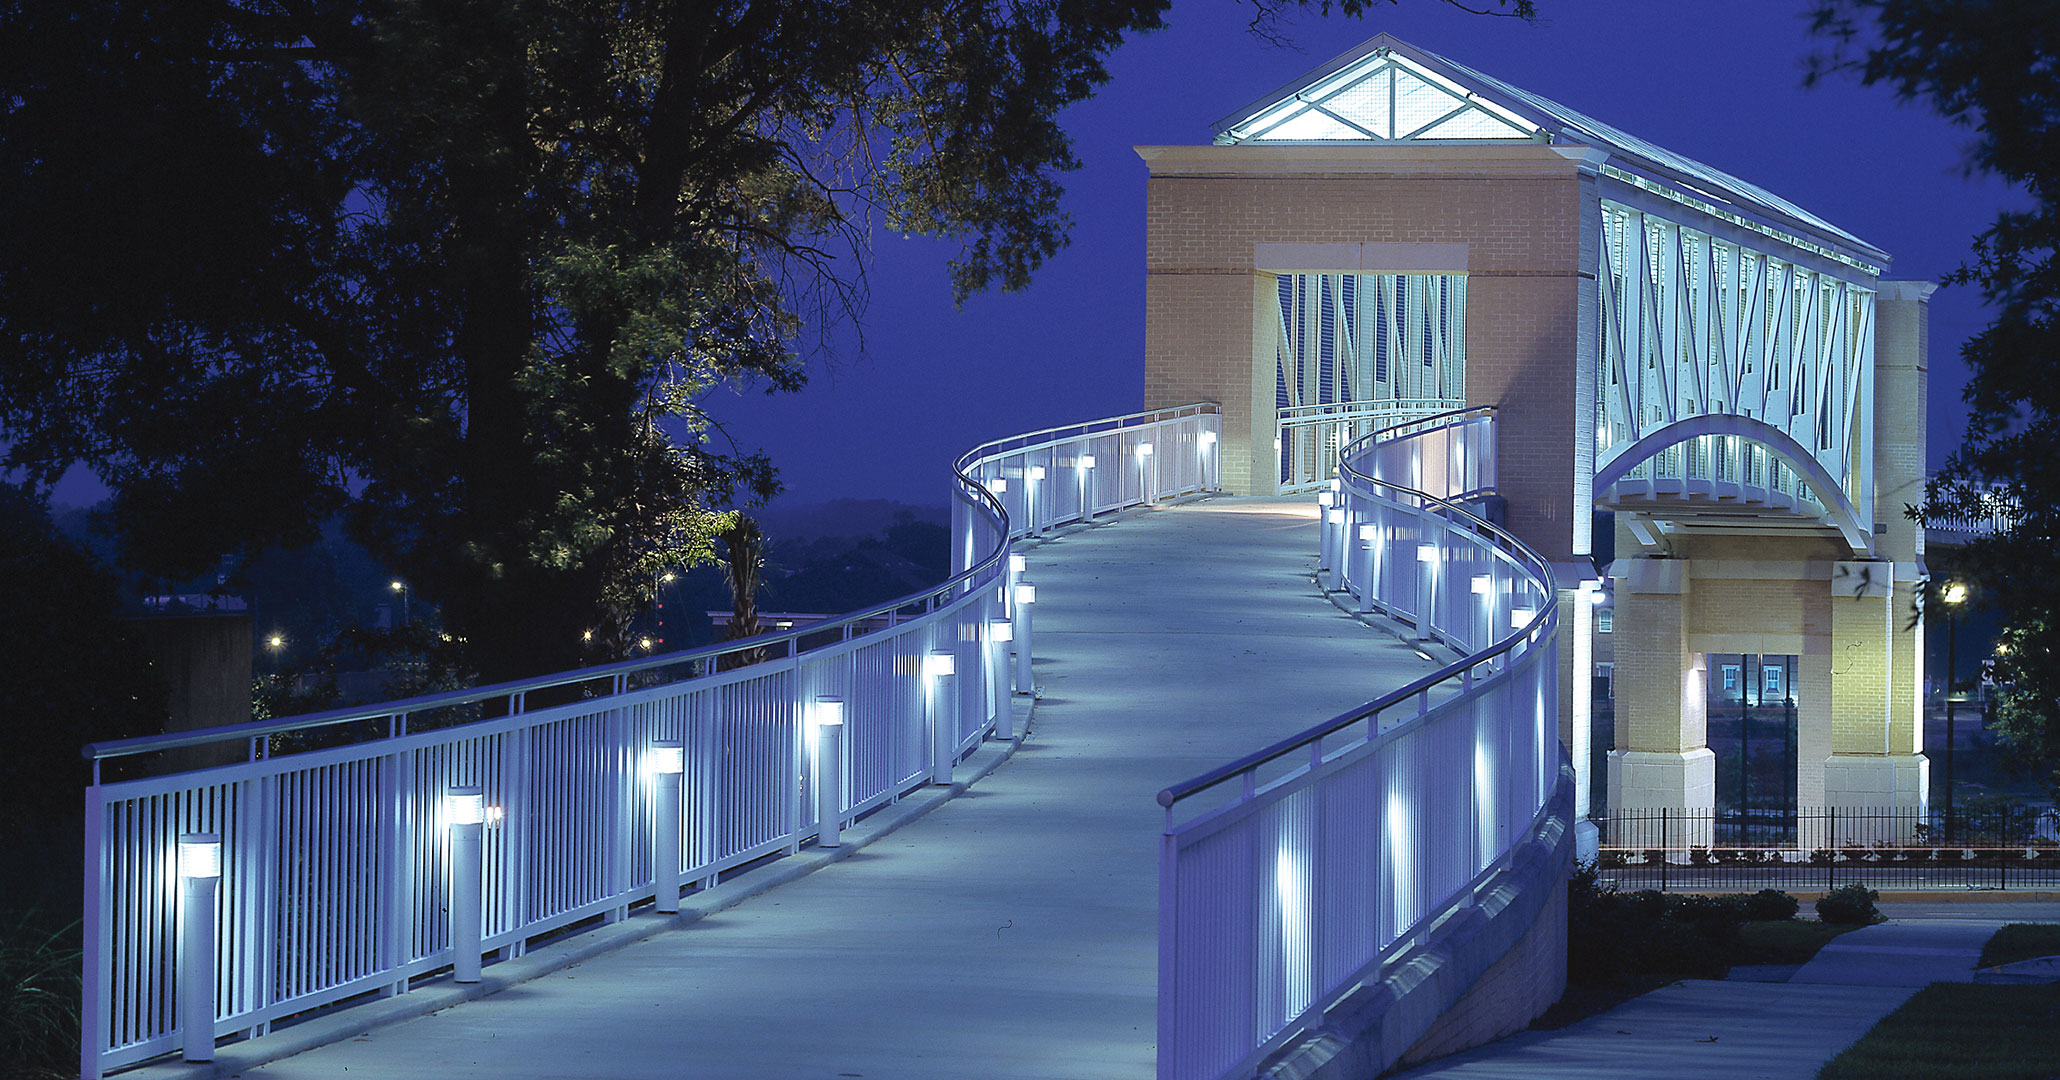 UofSC worked with Boudreaux architects to build the pedestrian student bridge in downtown Columbia, SC.